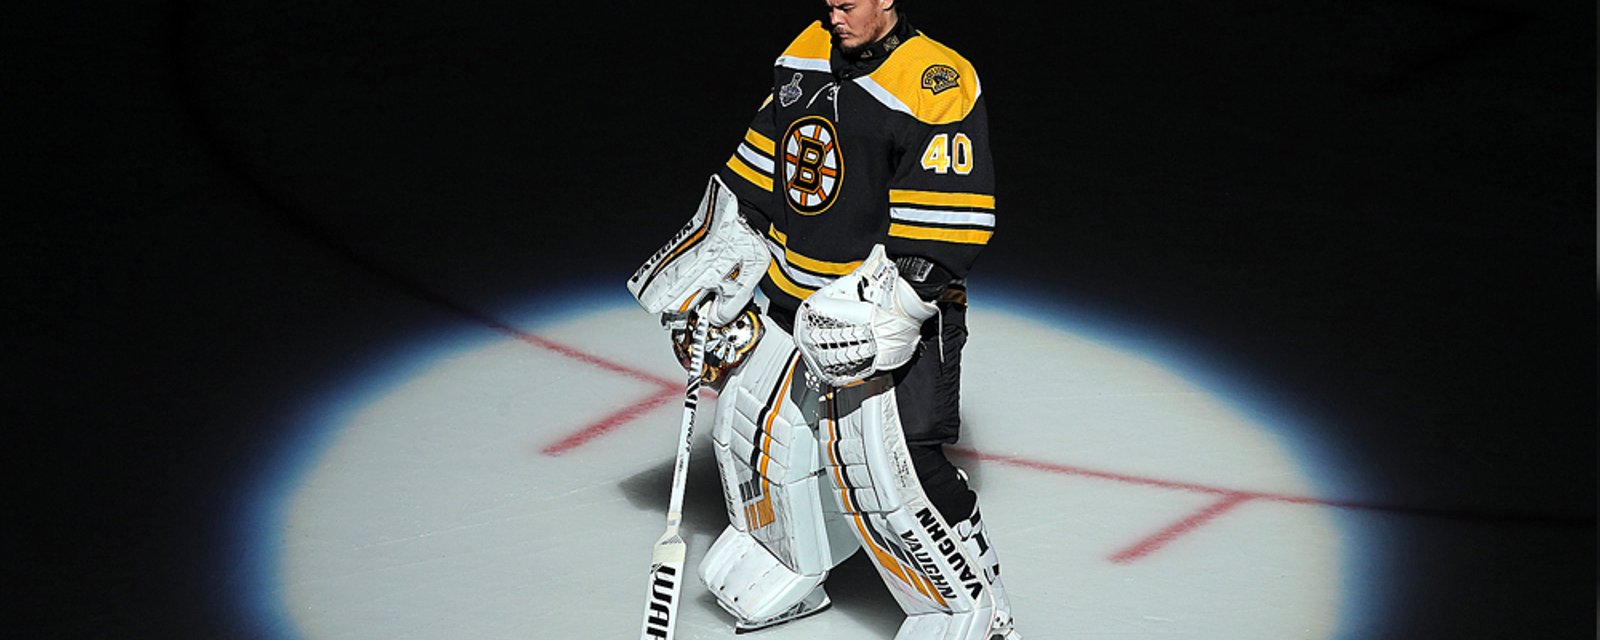 Rask opens up on his decision to leave the Bruins